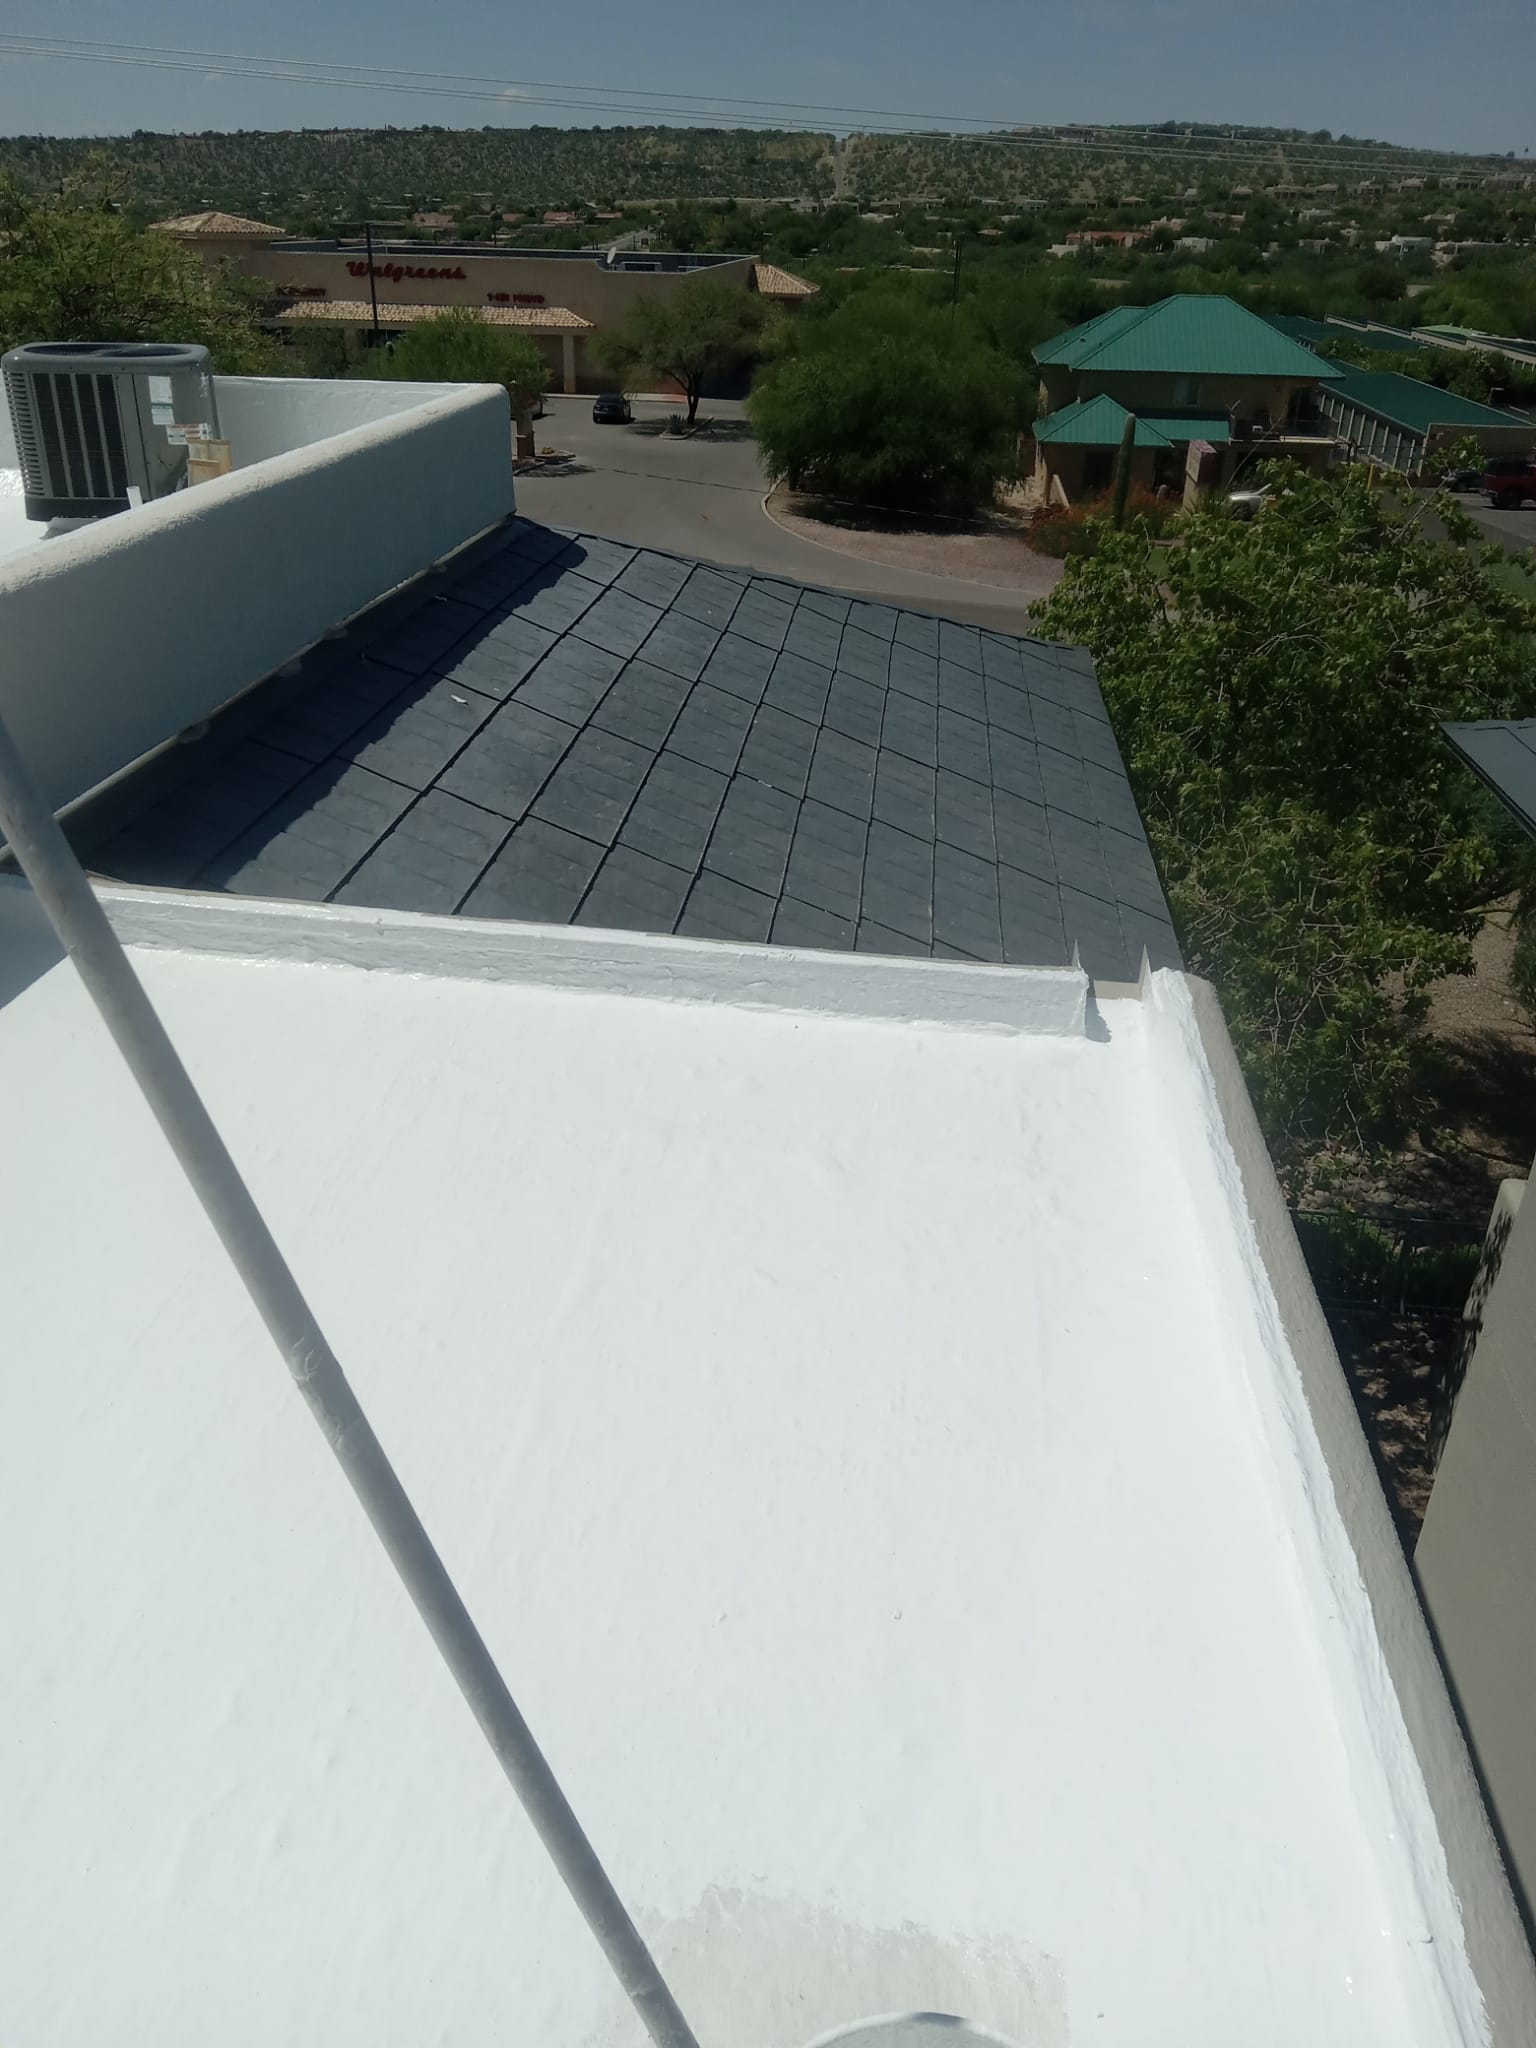 Completed spray foam roofing on a residential property in Peoria with a sleek finish.